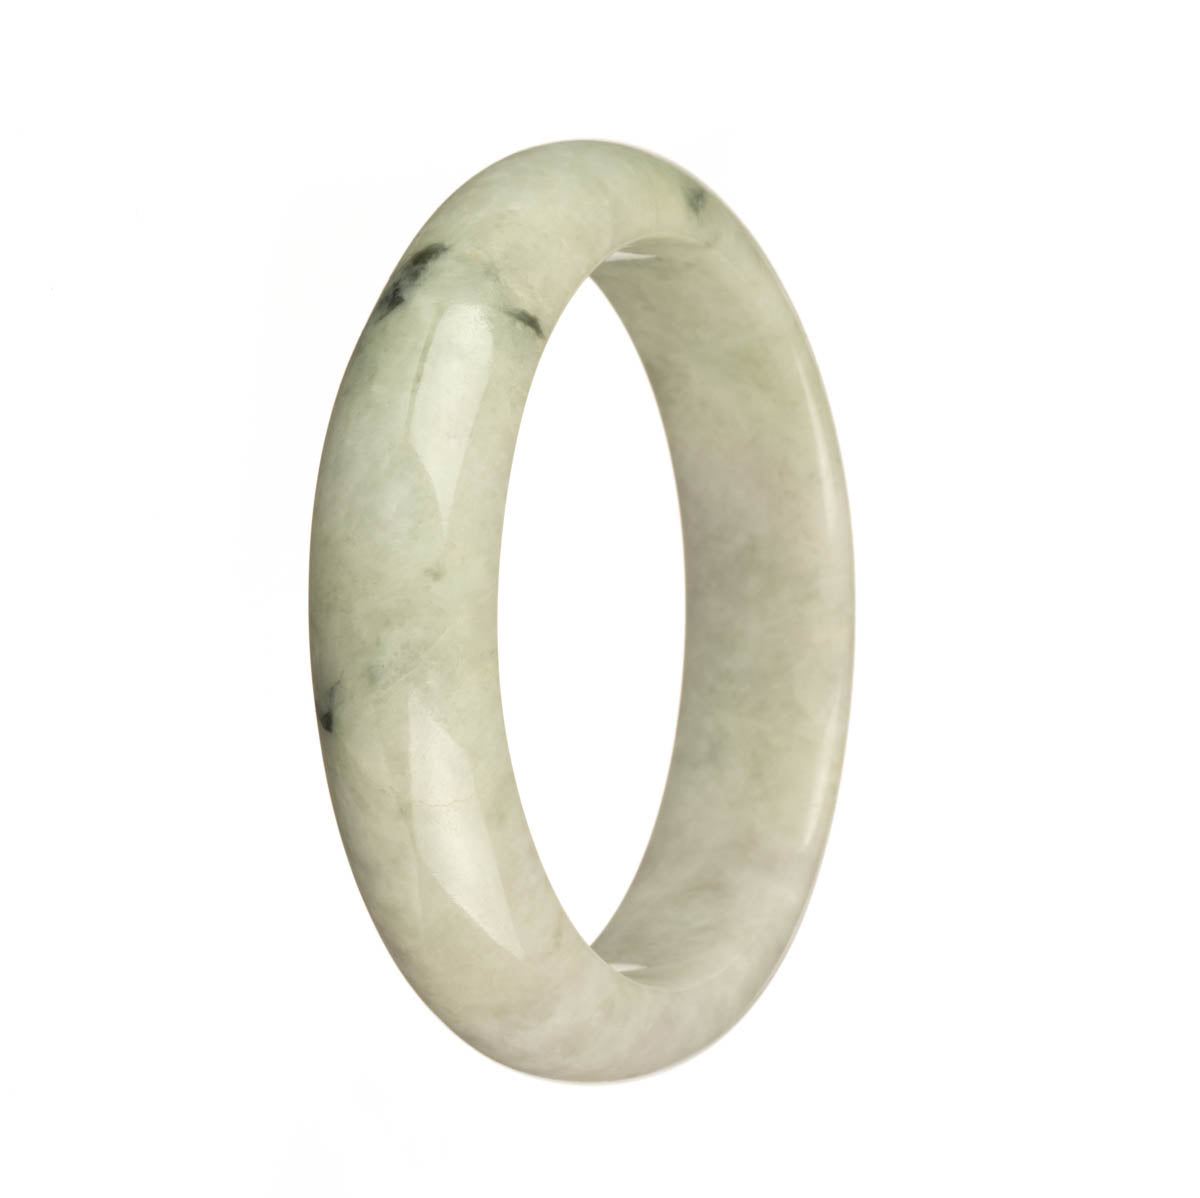 A stunning Real Grade A White and Pale Green with Dark Green Pattern Jade Bracelet in a 58mm Half Moon shape. Perfect for adding a touch of elegance to any outfit. Handcrafted by MAYS GEMS.